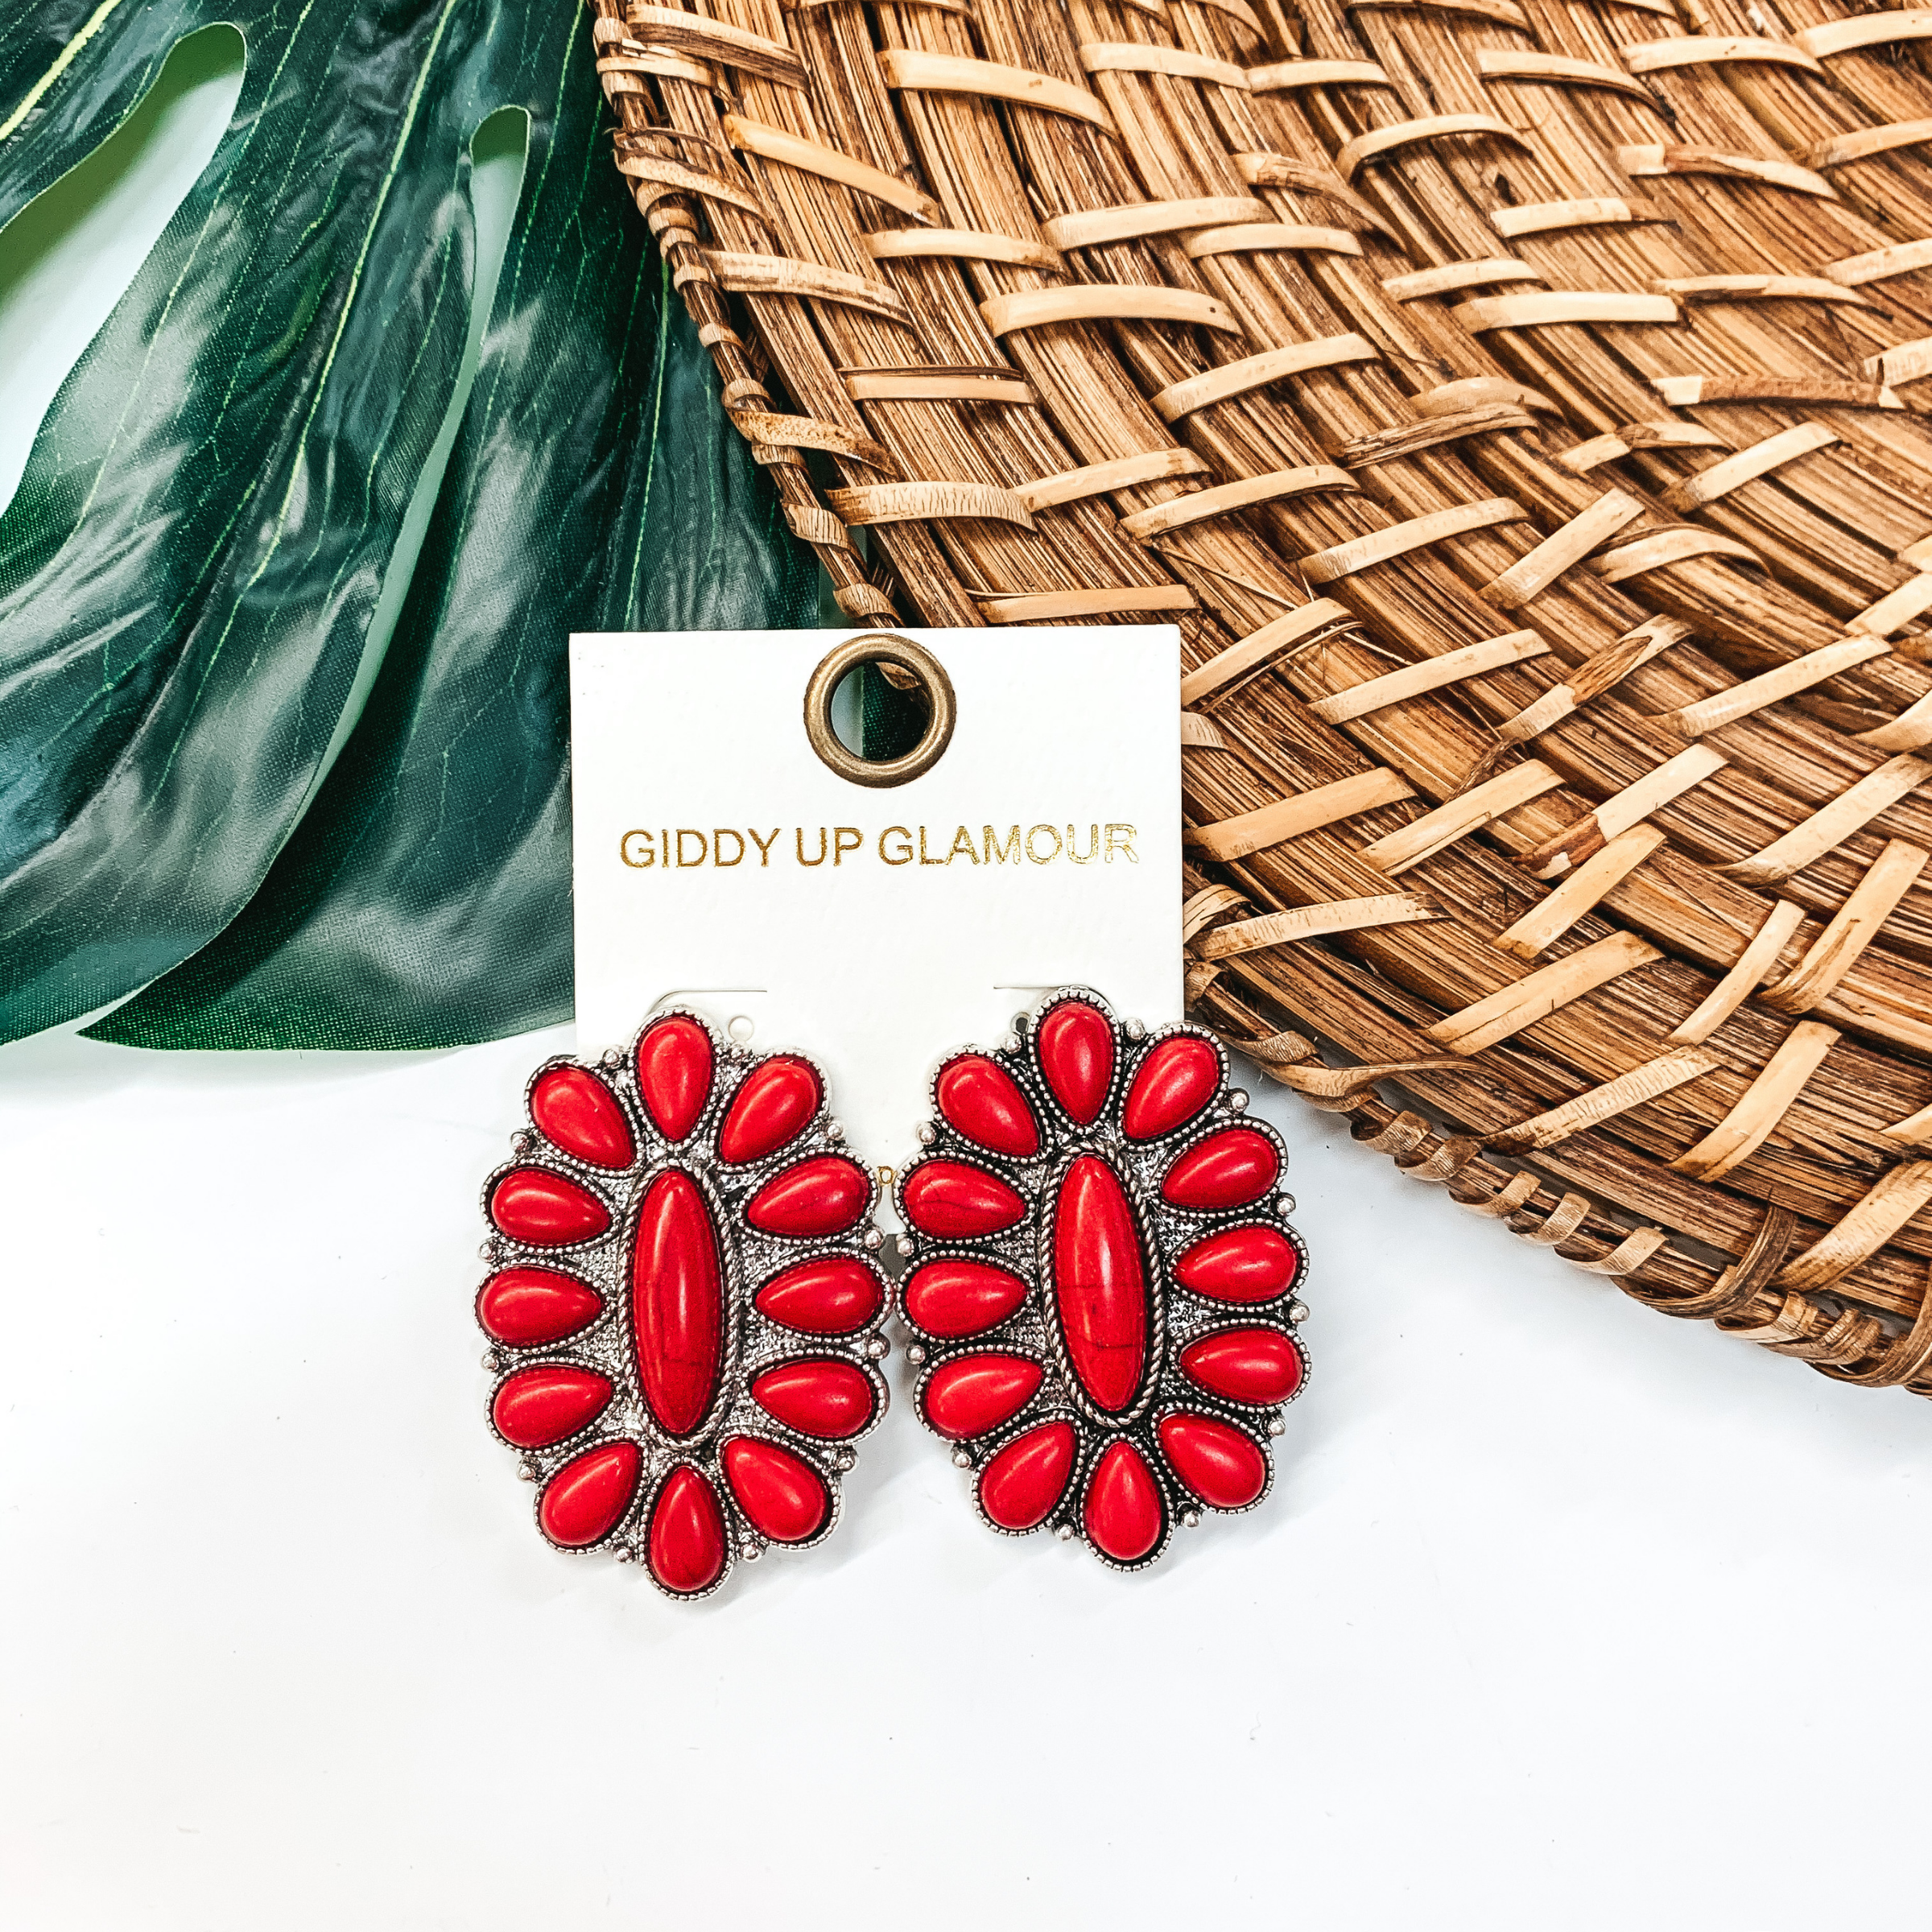 Oval cluster earrings with red stones. These earrings are pictured on a white background in front of a green leaf. 